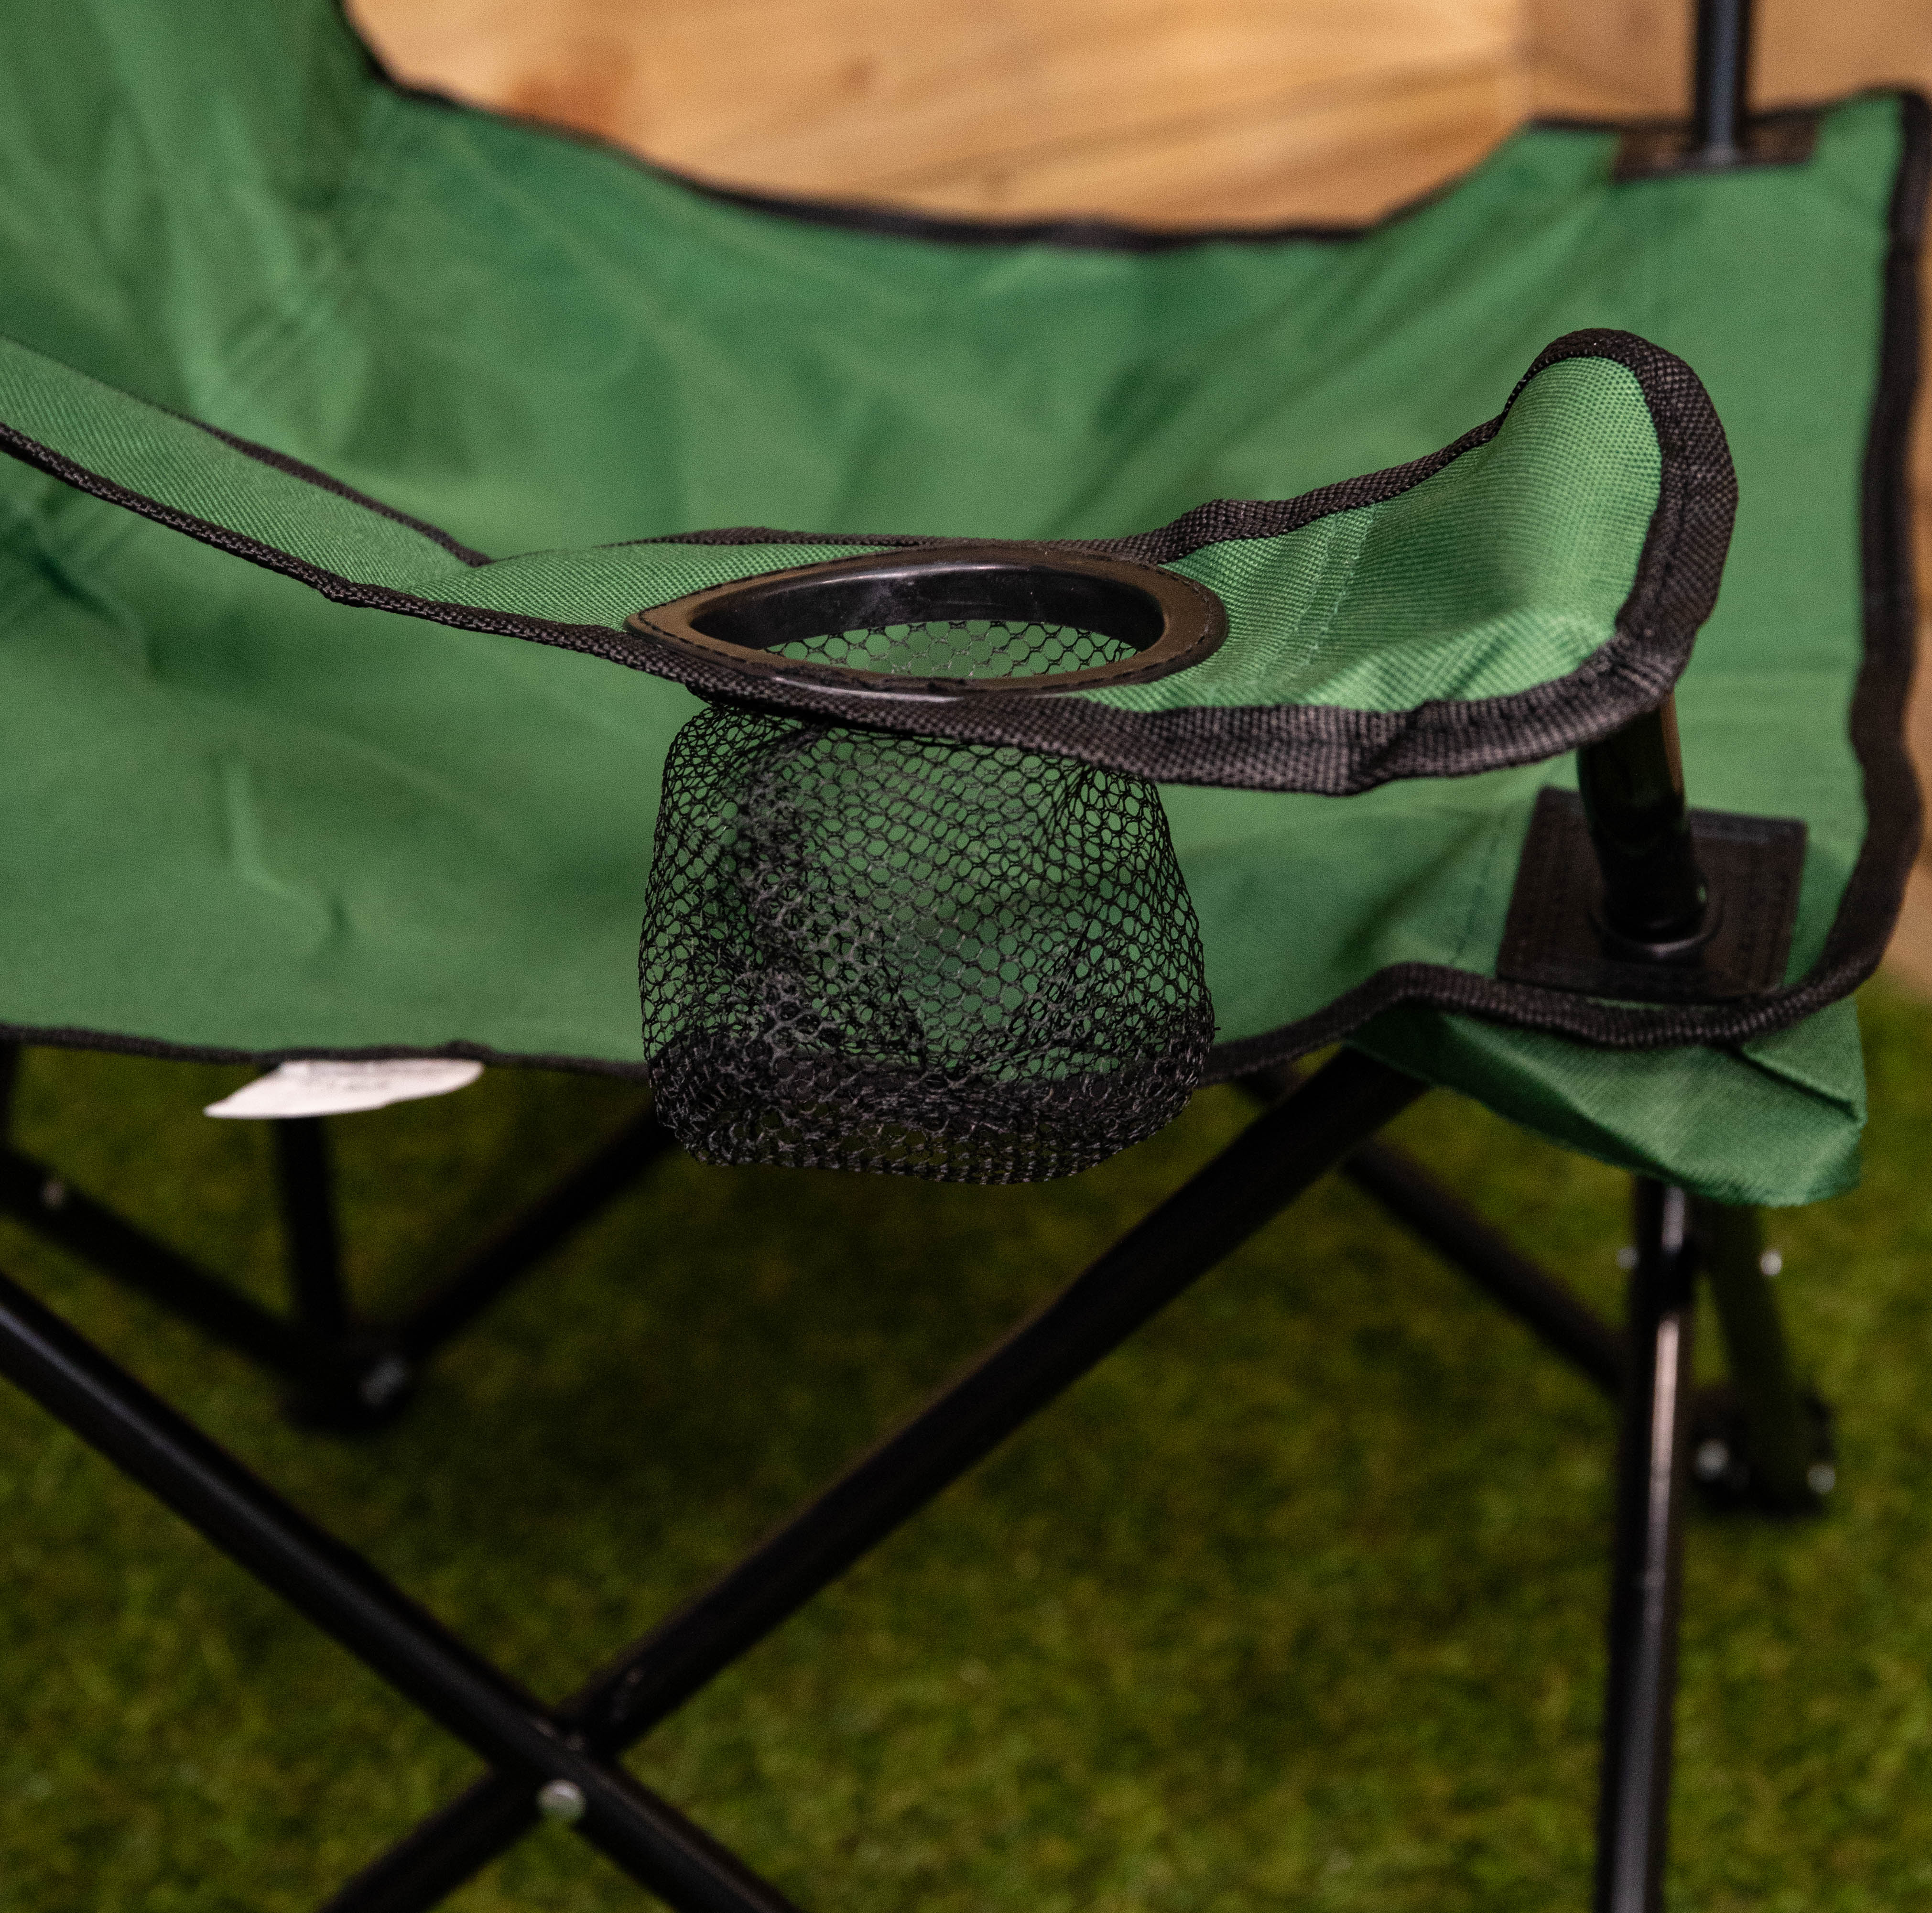 Green Folding Canvas Camping / Festival / Outdoor Chair with Arms and Cup Holder